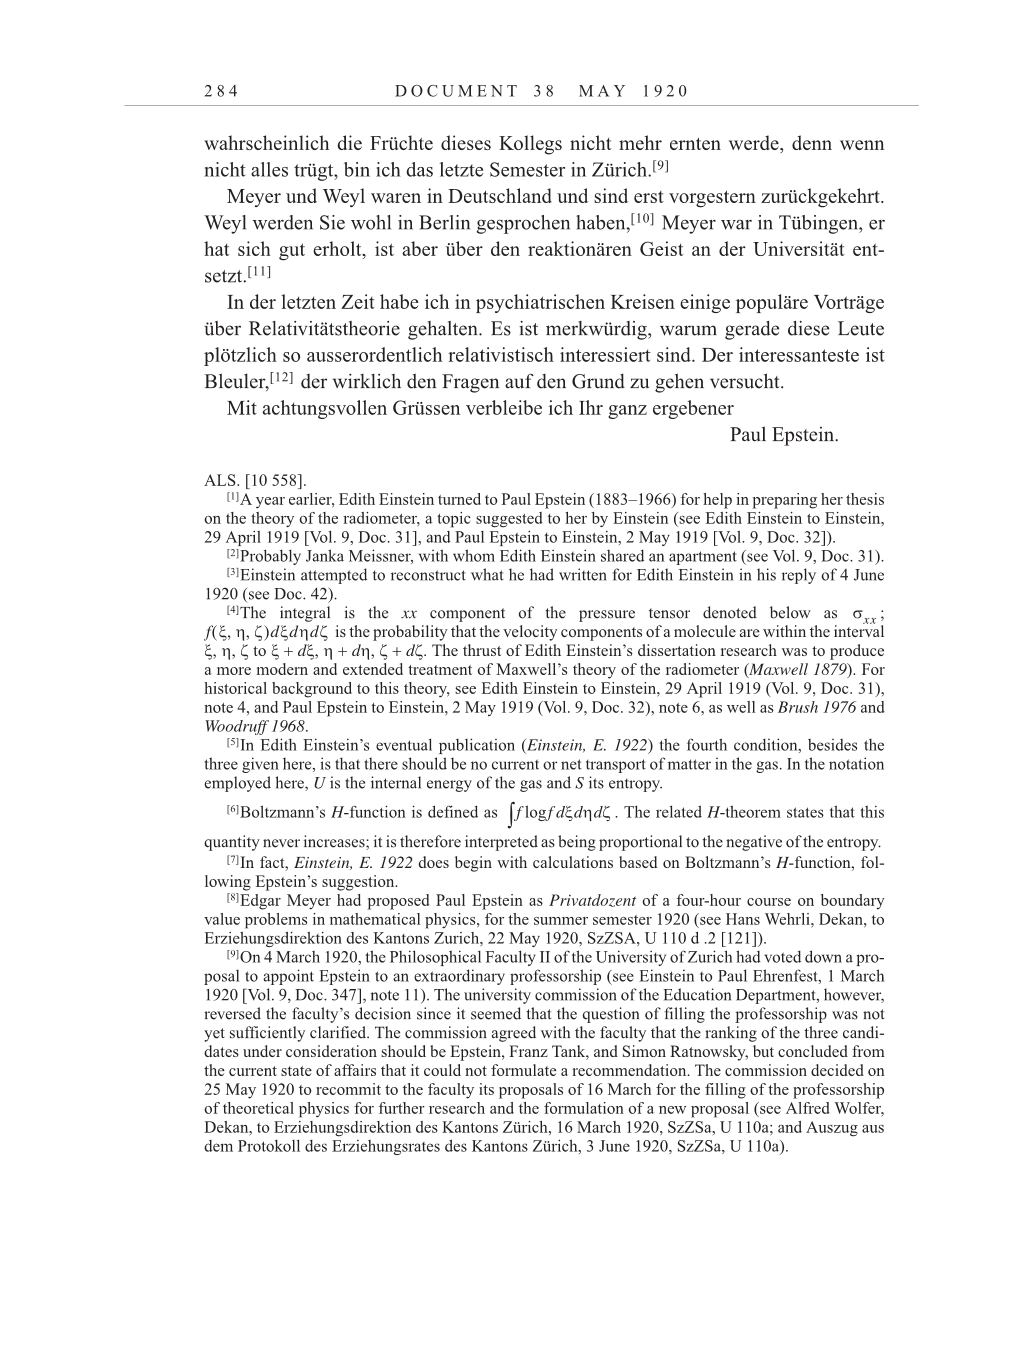 Volume 10: The Berlin Years: Correspondence May-December 1920 / Supplementary Correspondence 1909-1920 page 284